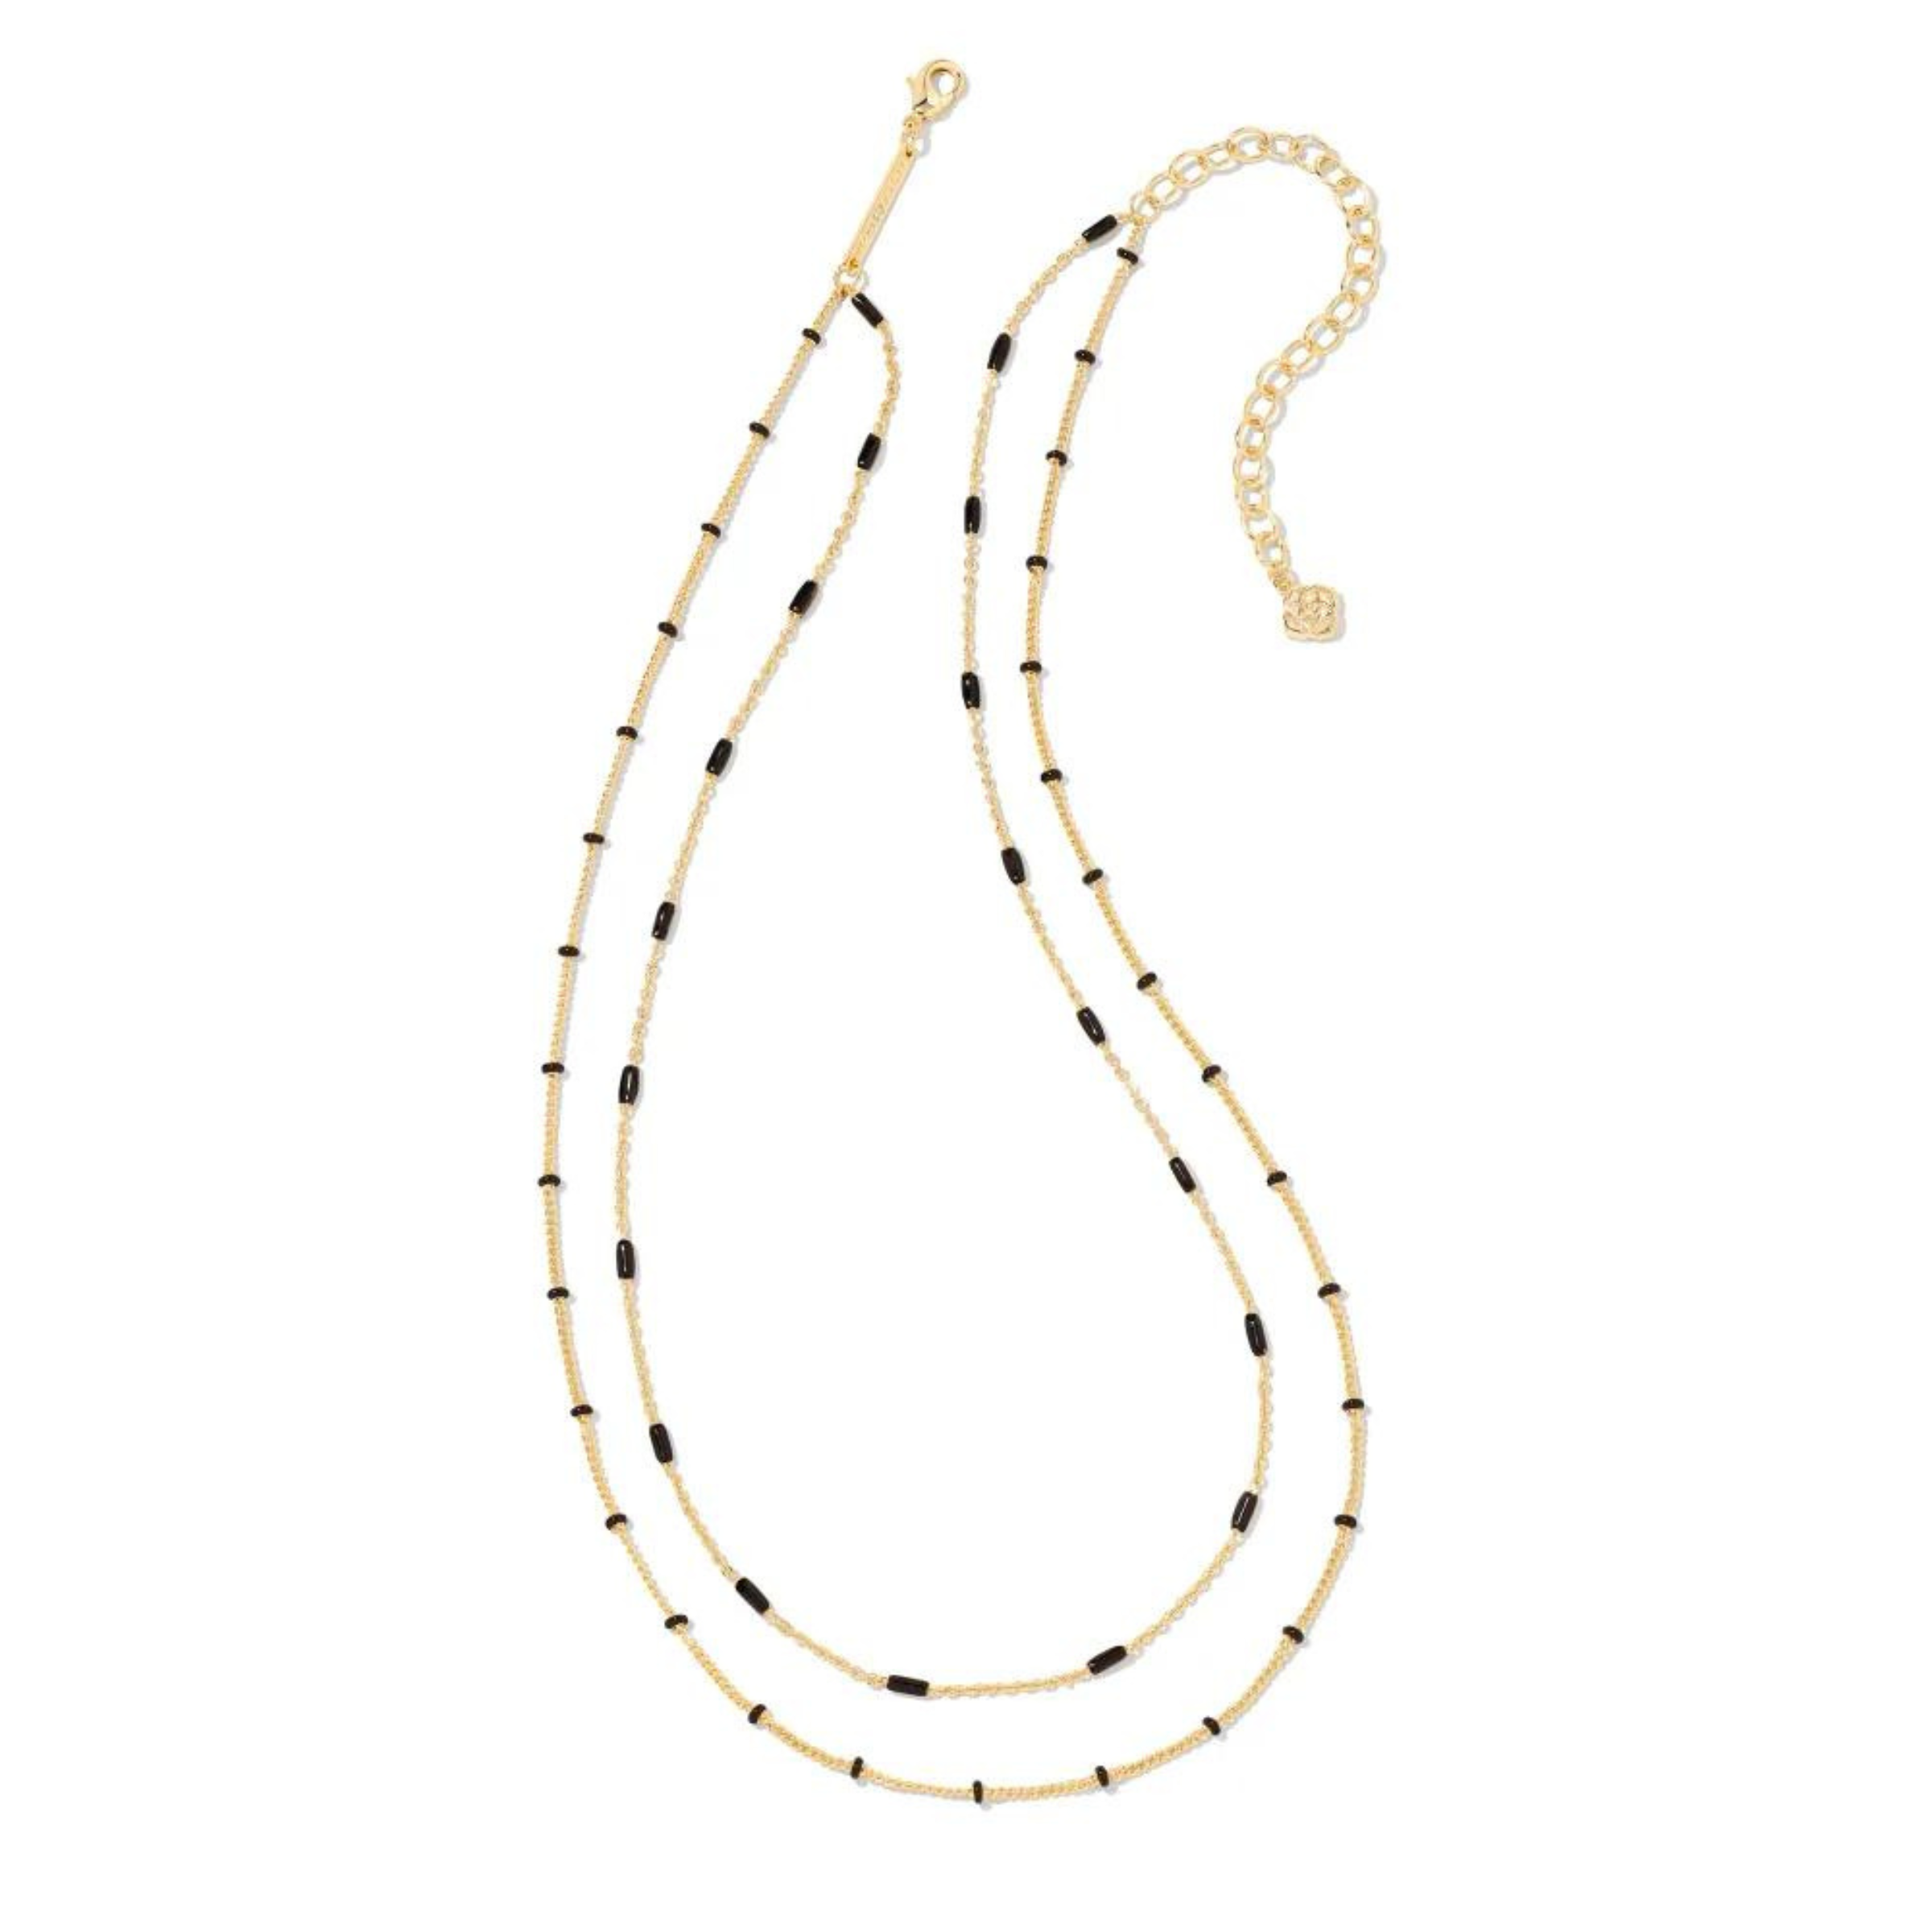 Two strand, adjustable chain necklace with black enamel spacers. This necklace is pictured on a white background. 